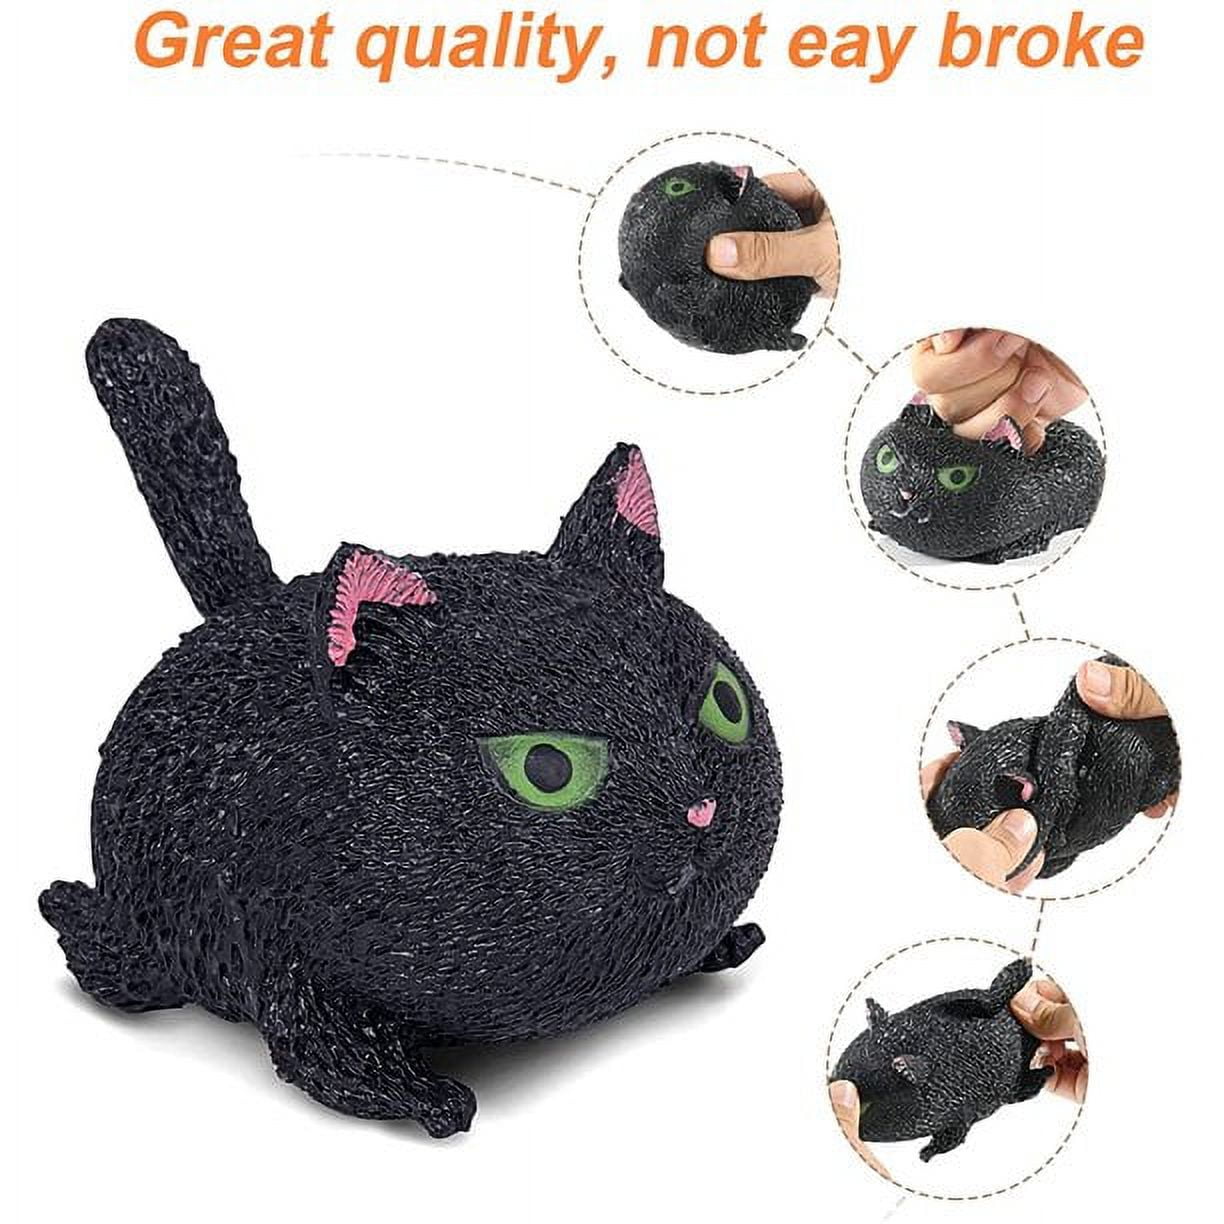 Pinch Angry Cat Cute Pet Toy Cat Shaped Squeeze Stress Relief Bola  Descompression Artifact Vent Toy Squeeze Animaltoys Kids Gift Ns2